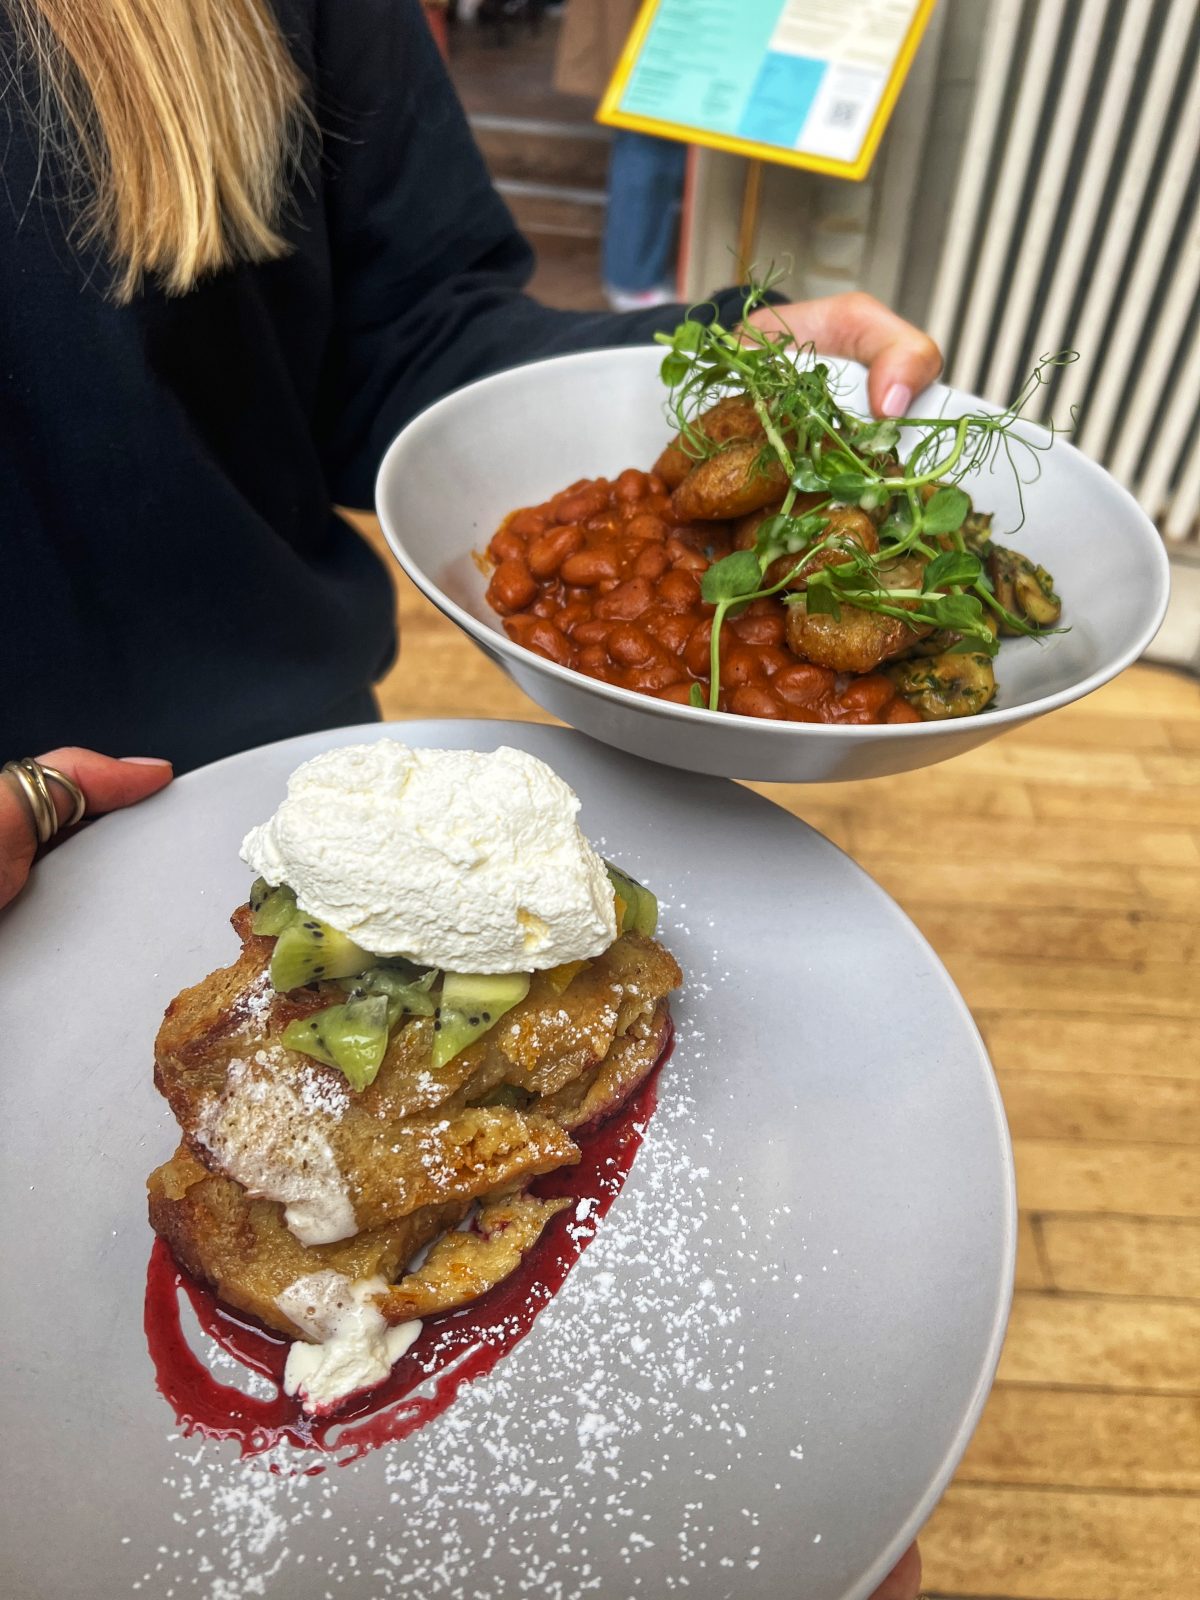 two plates held in each hand. One with pancakes another with beans.